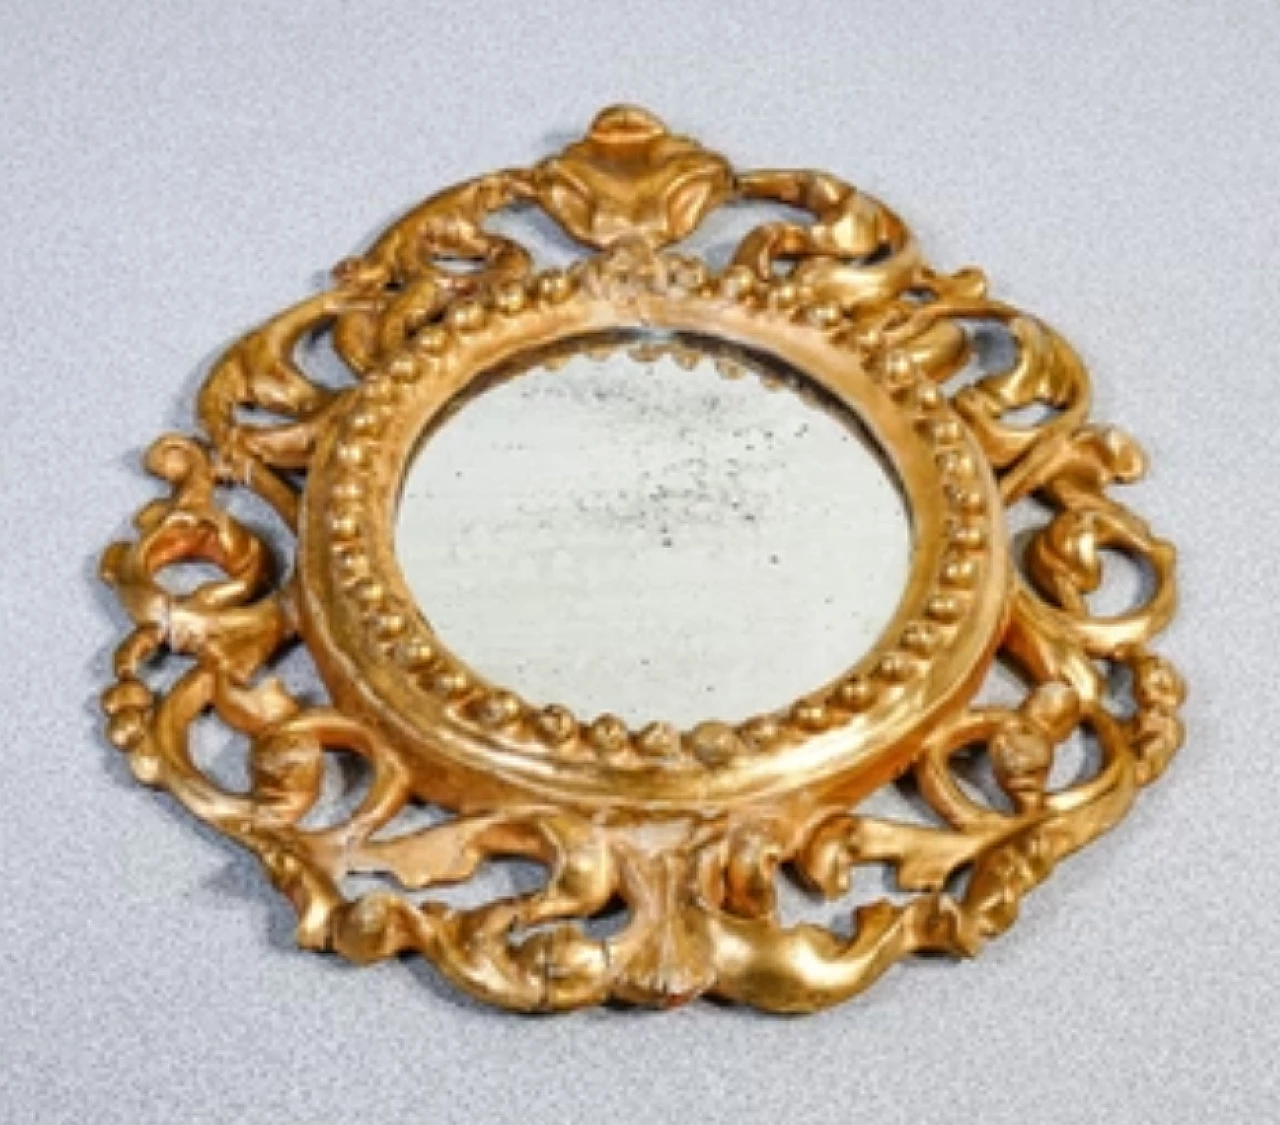 Carved wooden mirror gilded with gold leaf, 18th century 3